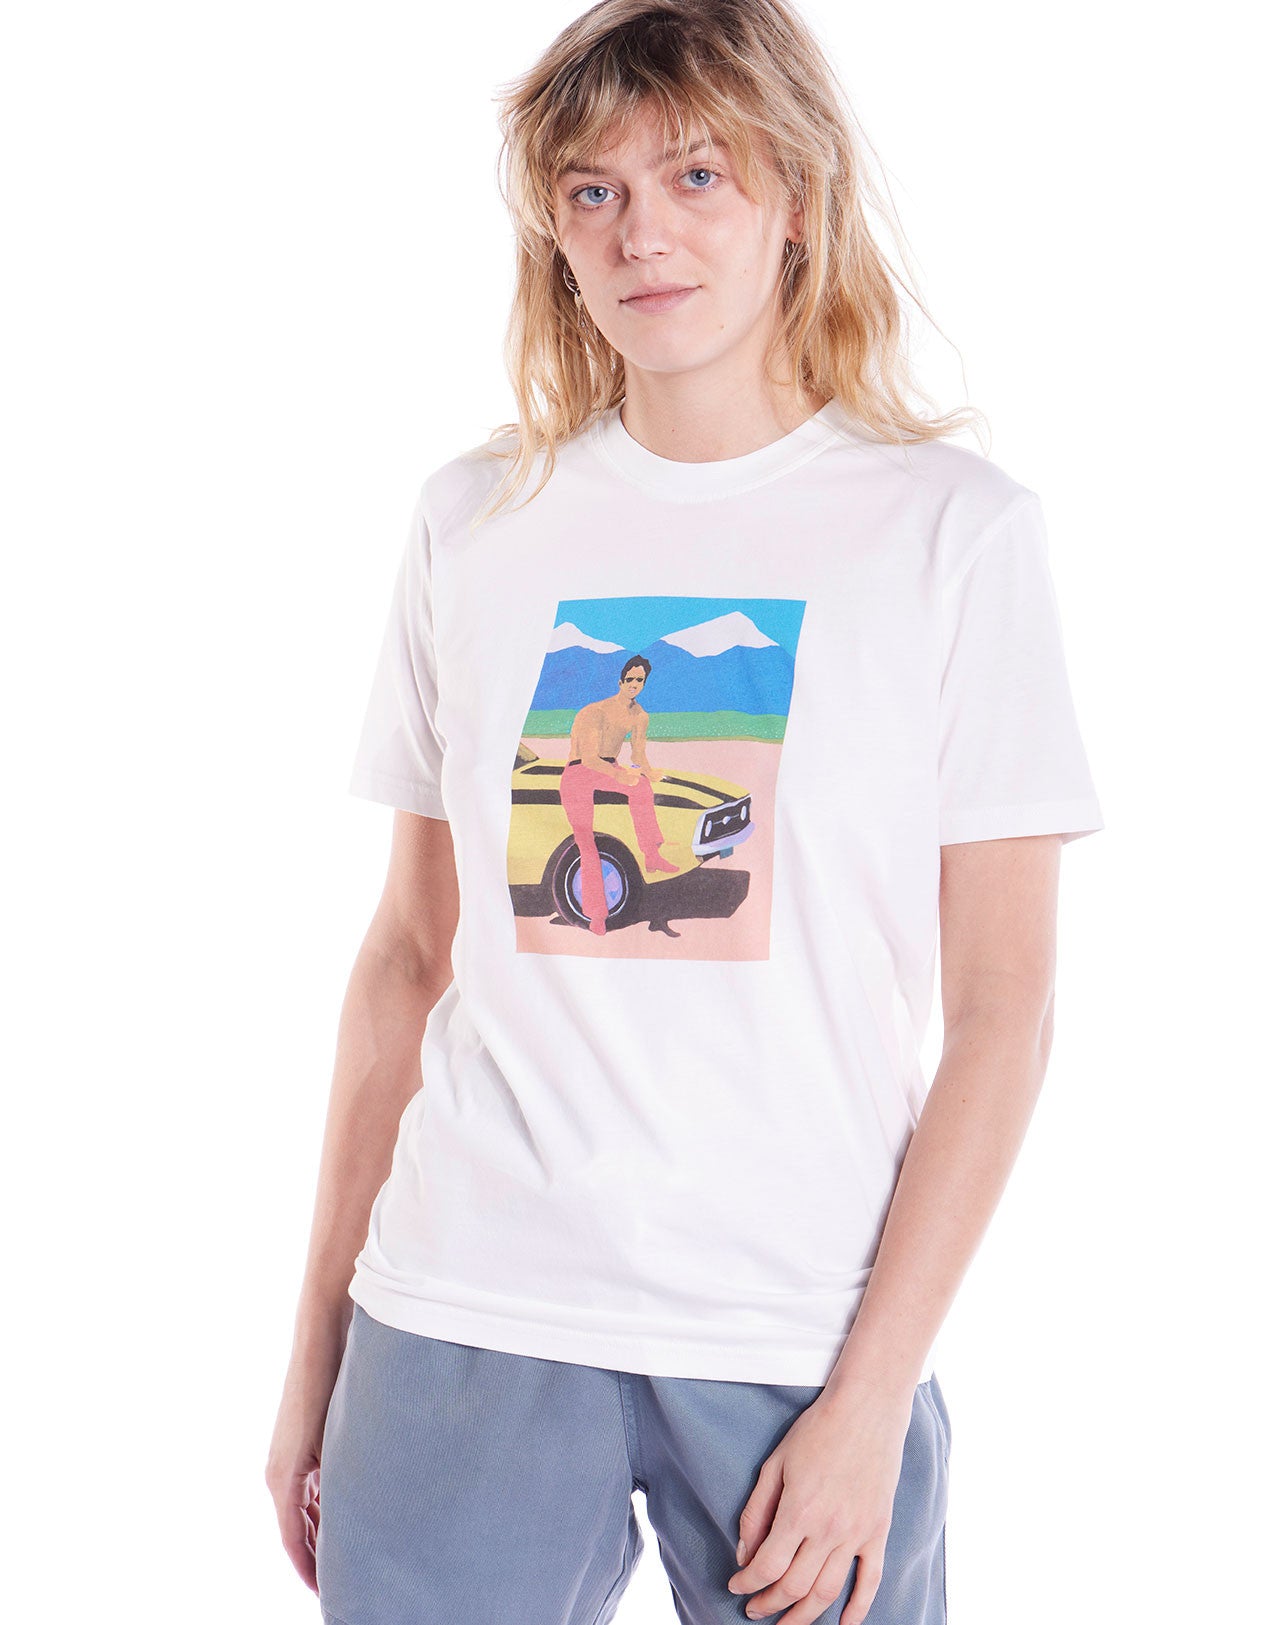 OLOW SUMMER T-SHIRT, Off white